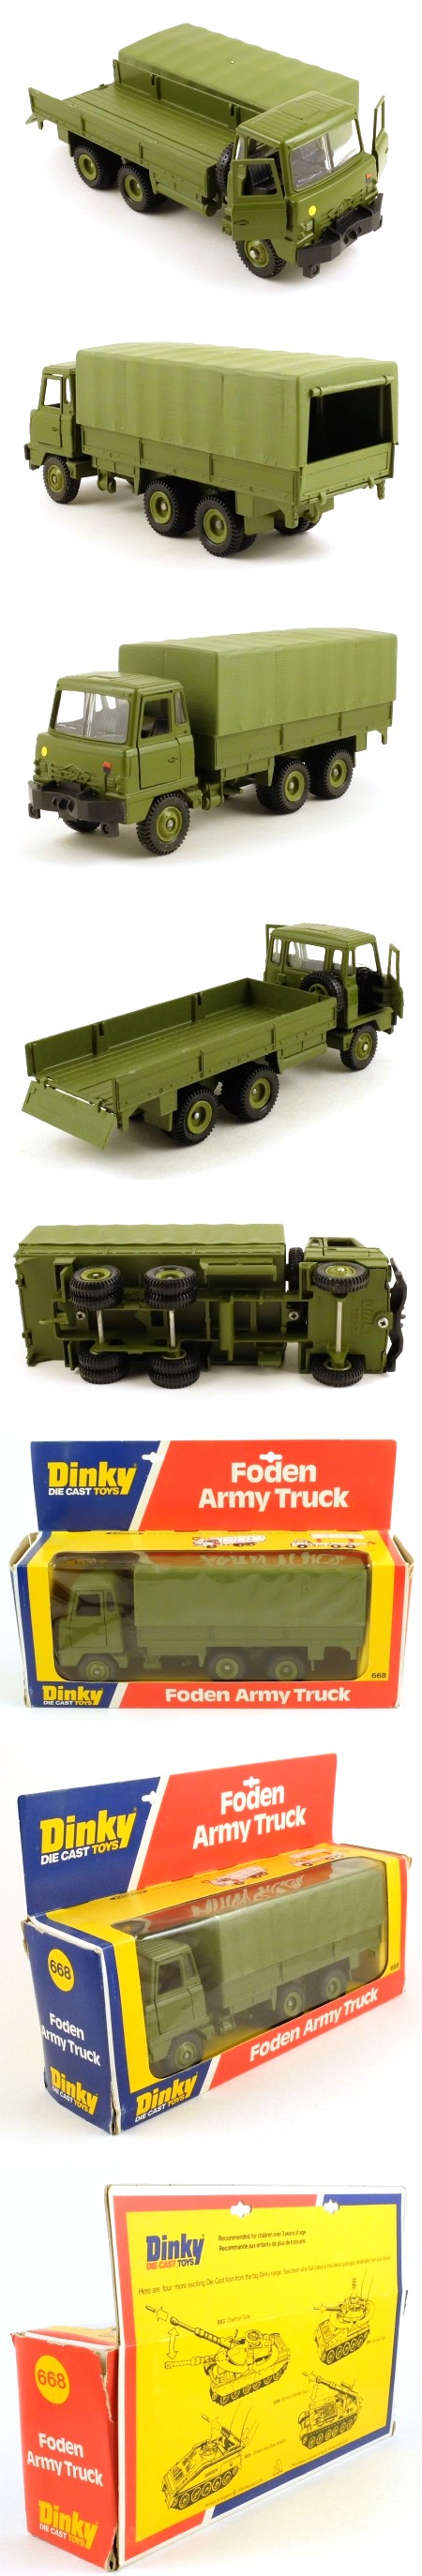 668 Foden Army Truck